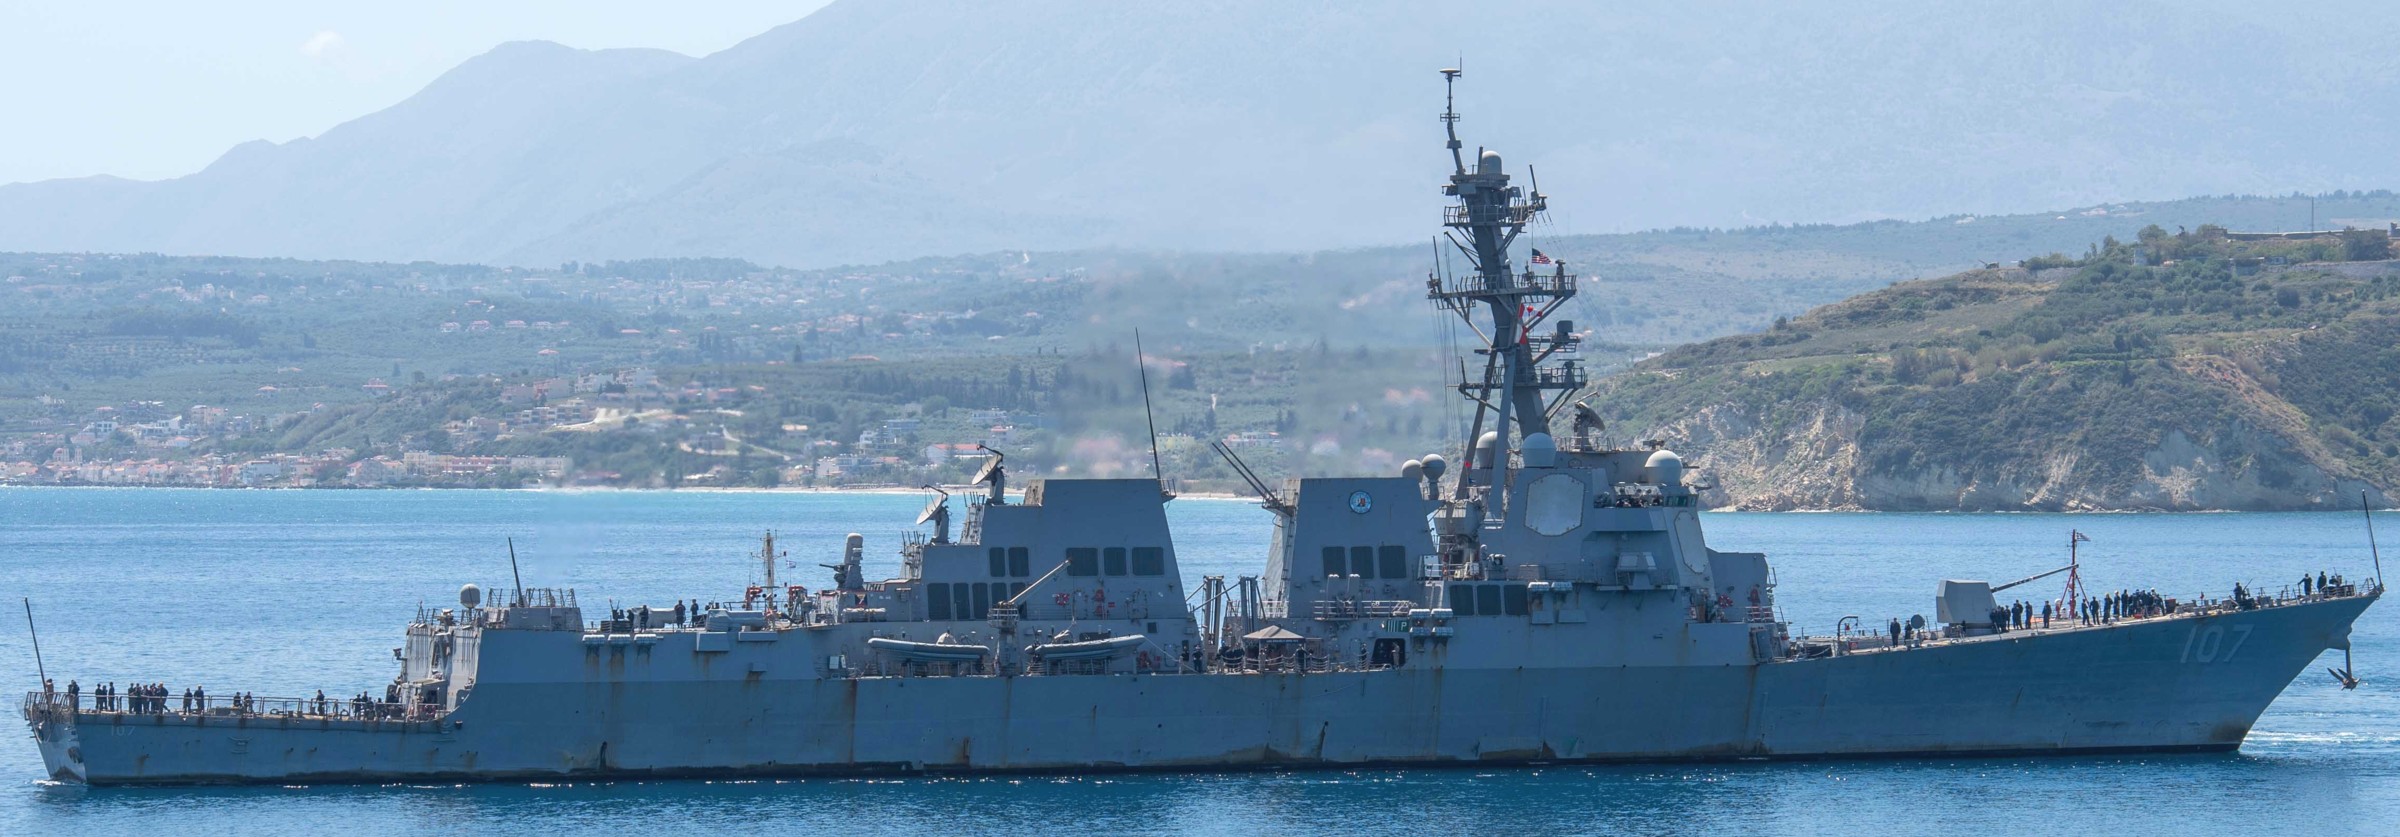 ddg-107 uss gravely arleigh burke class guided missile destroyer nsa souda bay crete greece 2024 72